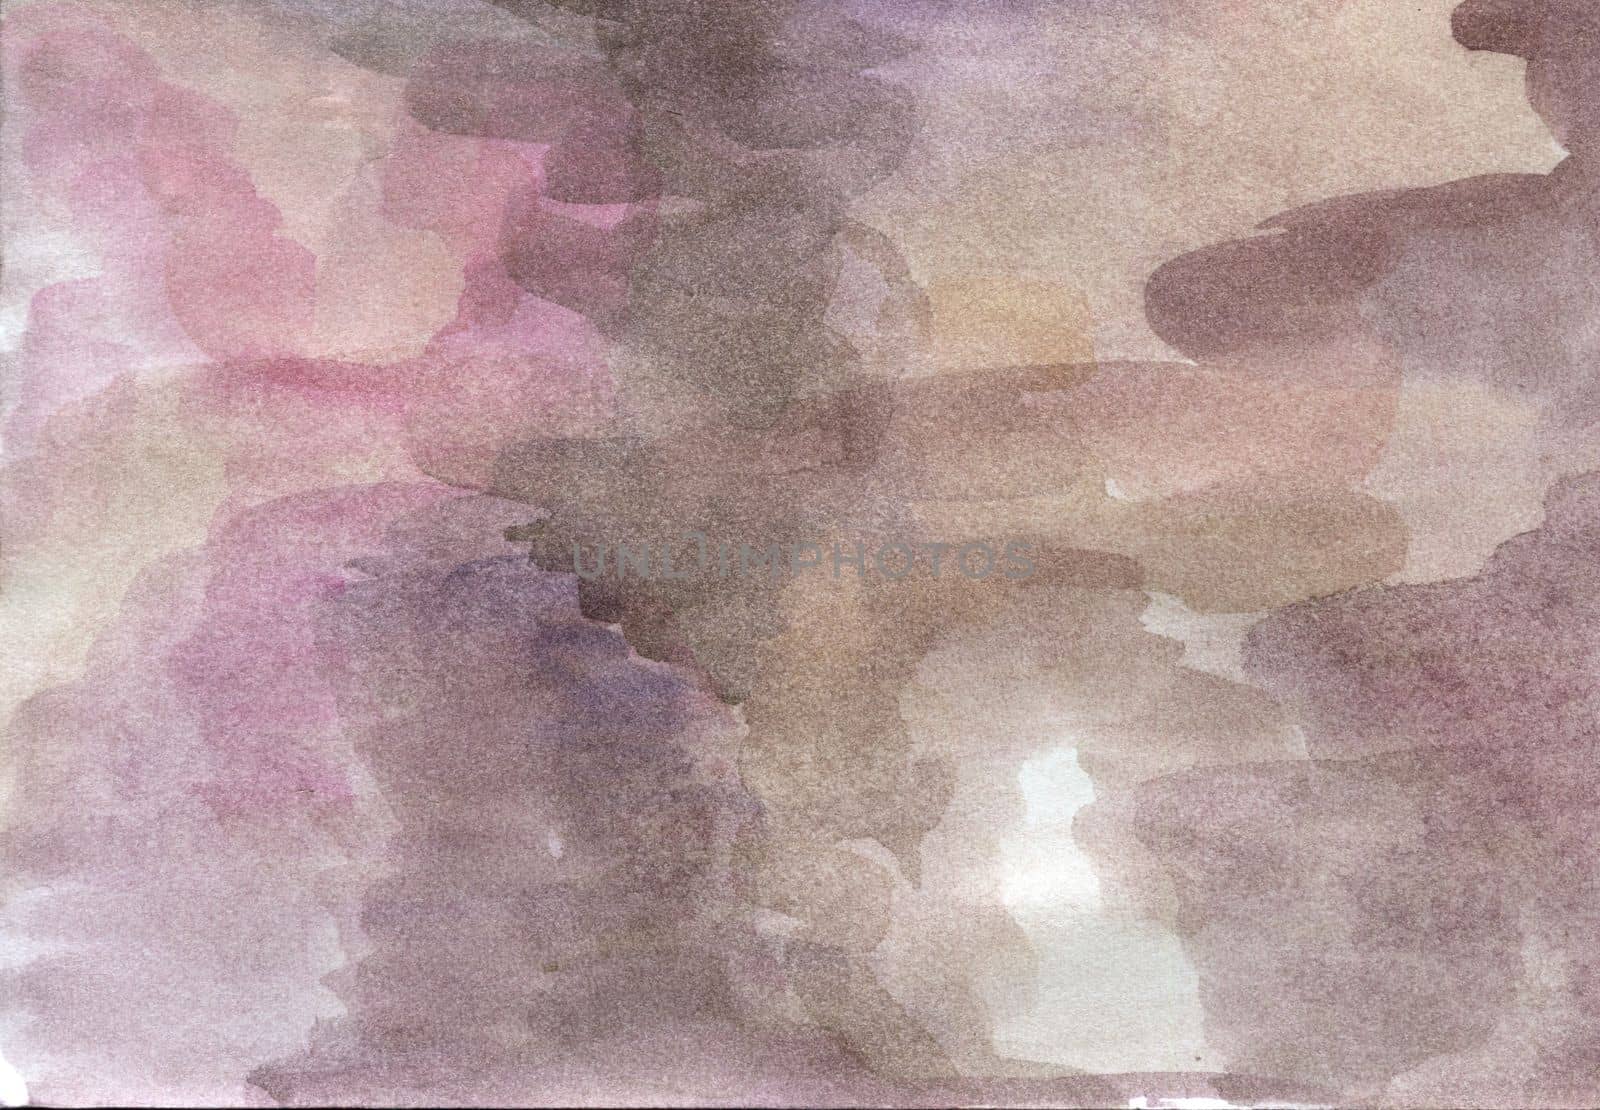 Soft Pink hand-drawn watercolor background Hight quality